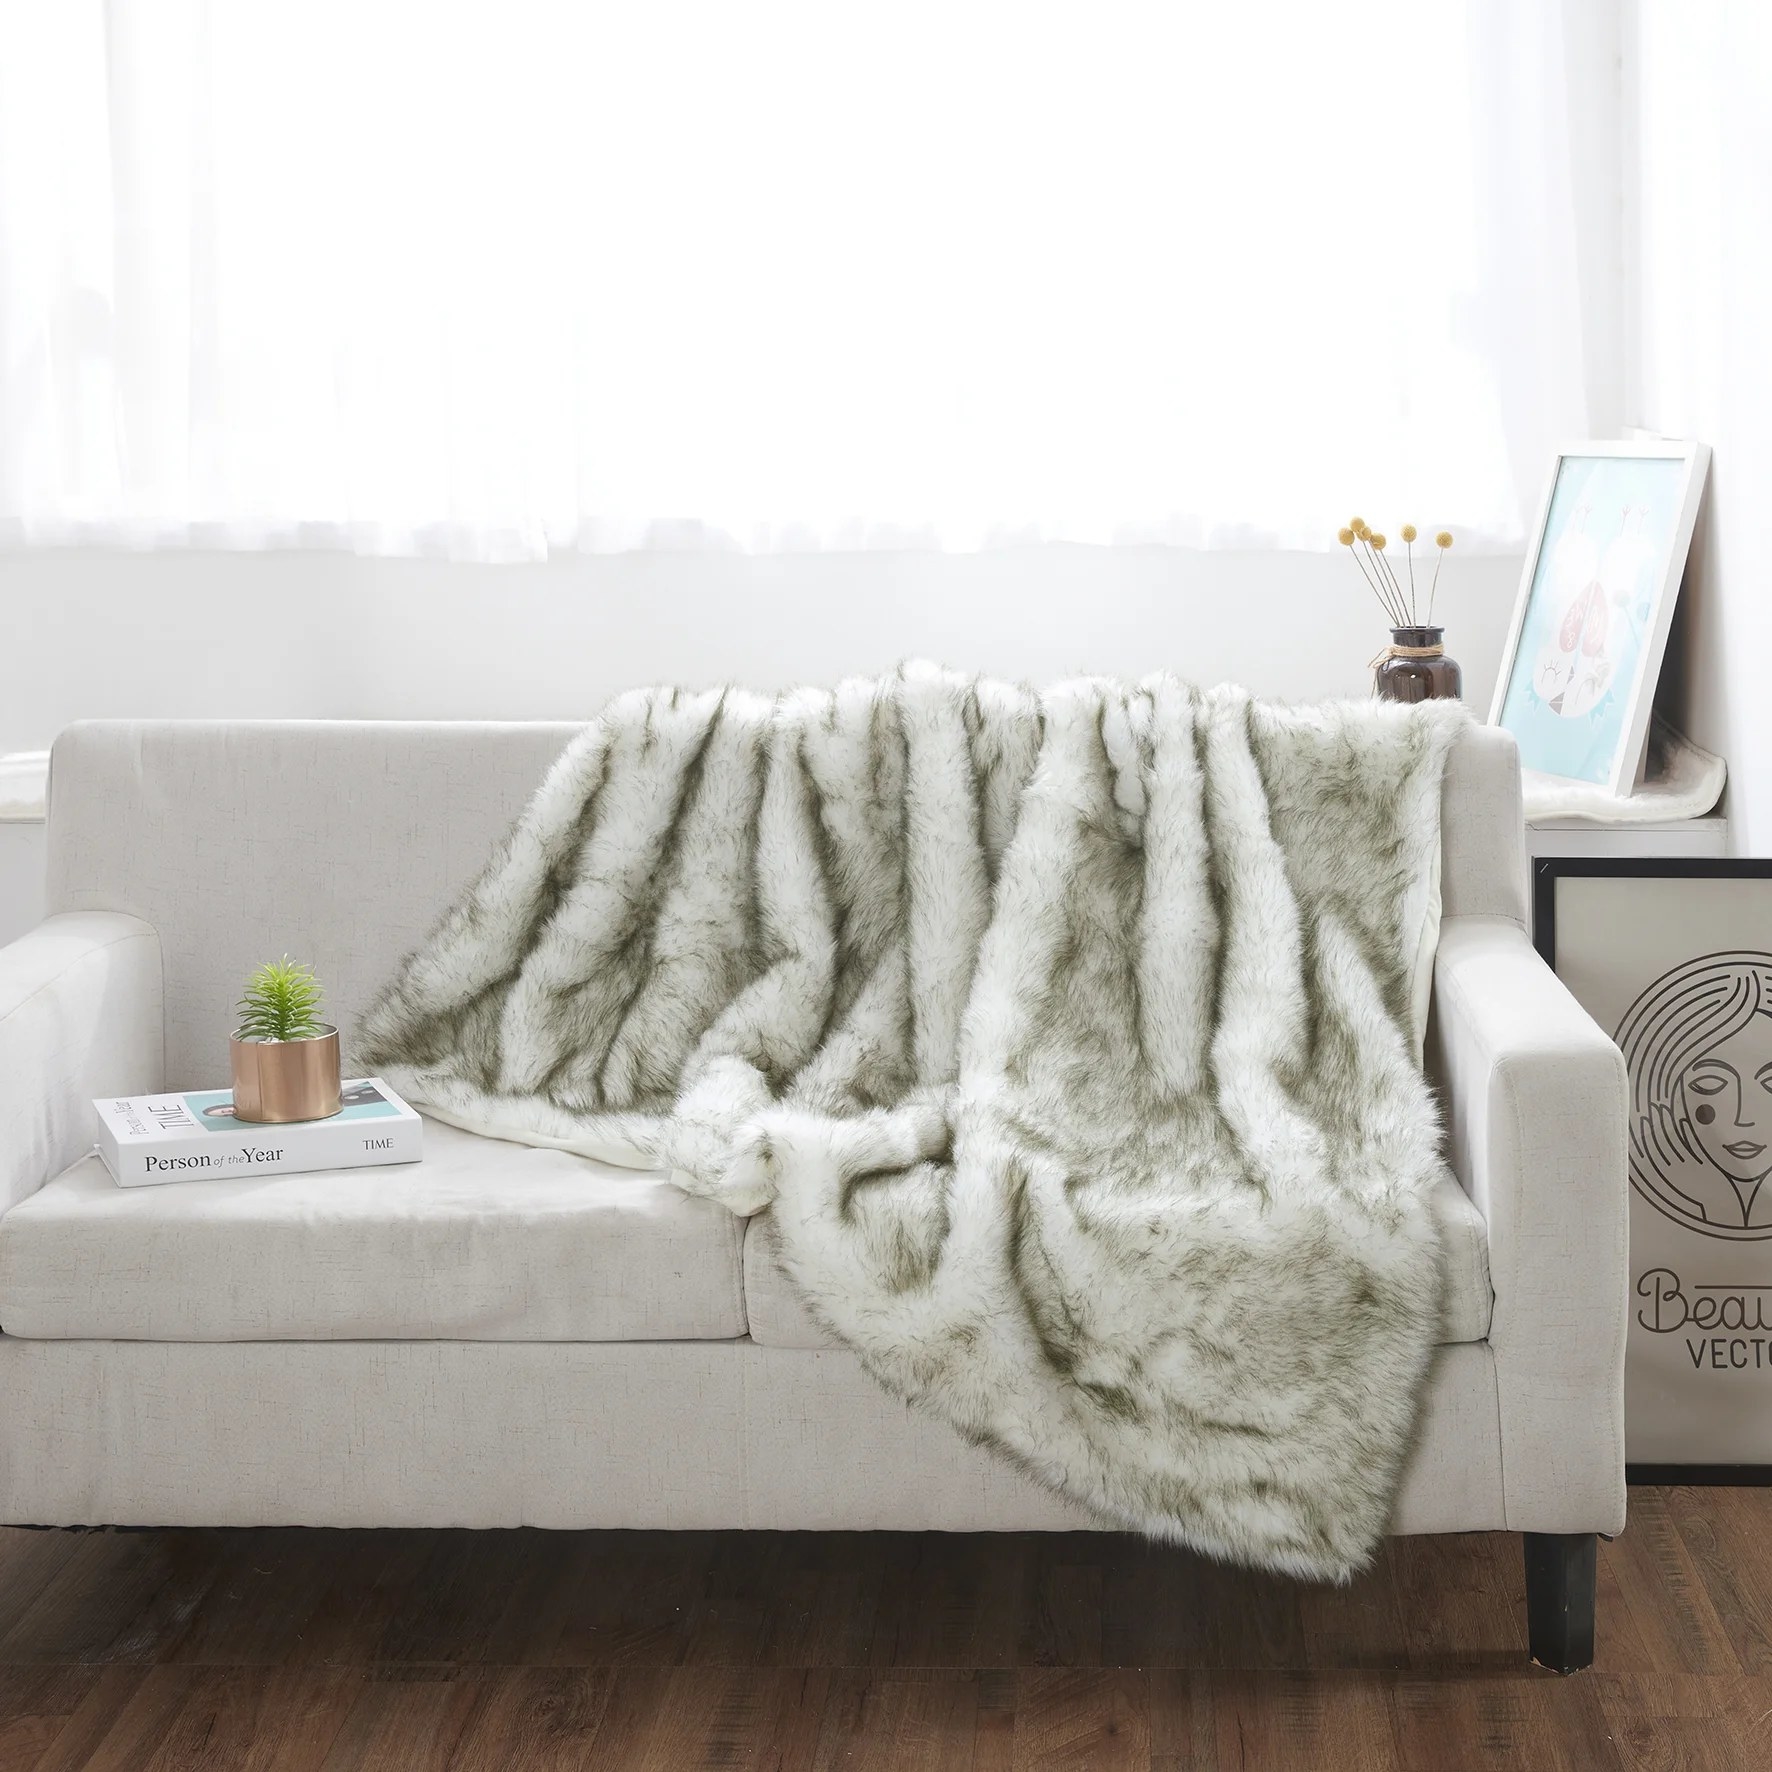 The ivory throw with some dark contrast throughout on the back of a couch